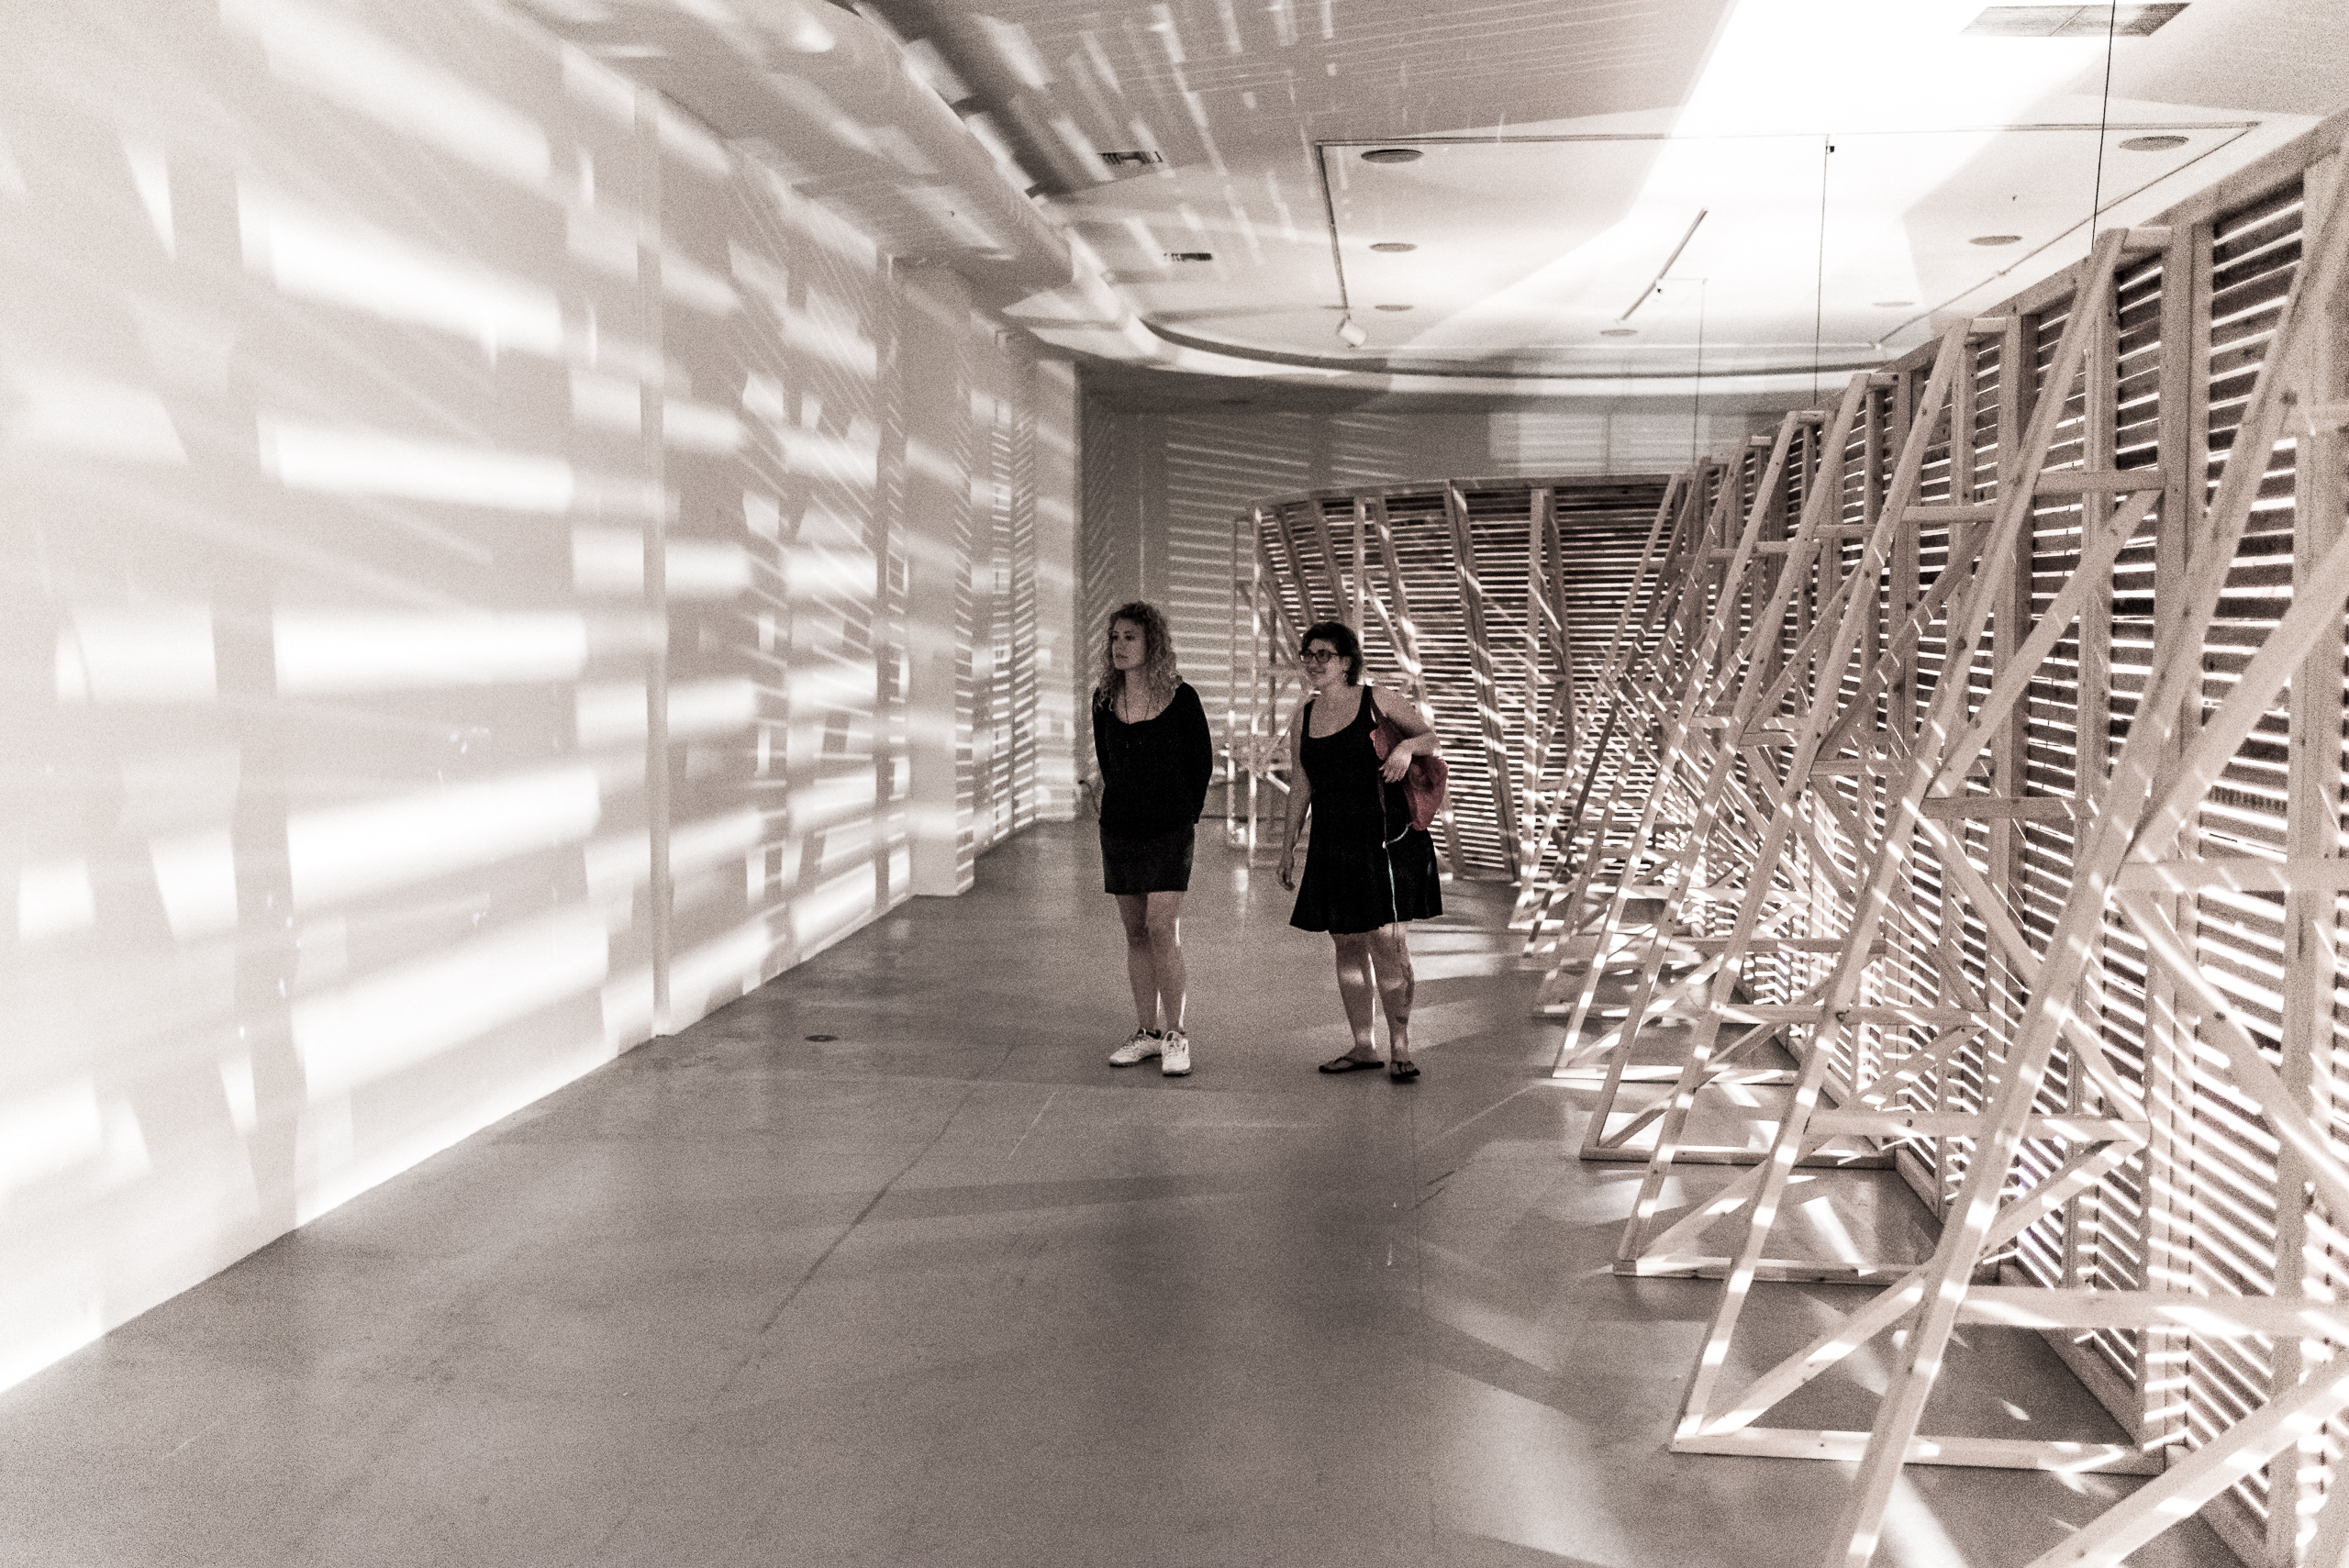 Jimena Sarno's installation "Home Away From" at Los Angeles Contemporary Exhibitions (LACE) on Hollywood Blvd in Los Angeles. The full-gallery installation consists of a lath-and-no-plaster wooden structure with a long corridor leading to a round room. The corridor and room have a few lights bulbs hanging like pendulums from long cords. This is the only light in the installation. Visitors can sway the lights like pendulums. The lights cast shadows inside the space and also through the lath they make geometric patters on the gallery walls on the other side. The piece is accompanied by an ambient music score that comes in through the lath.